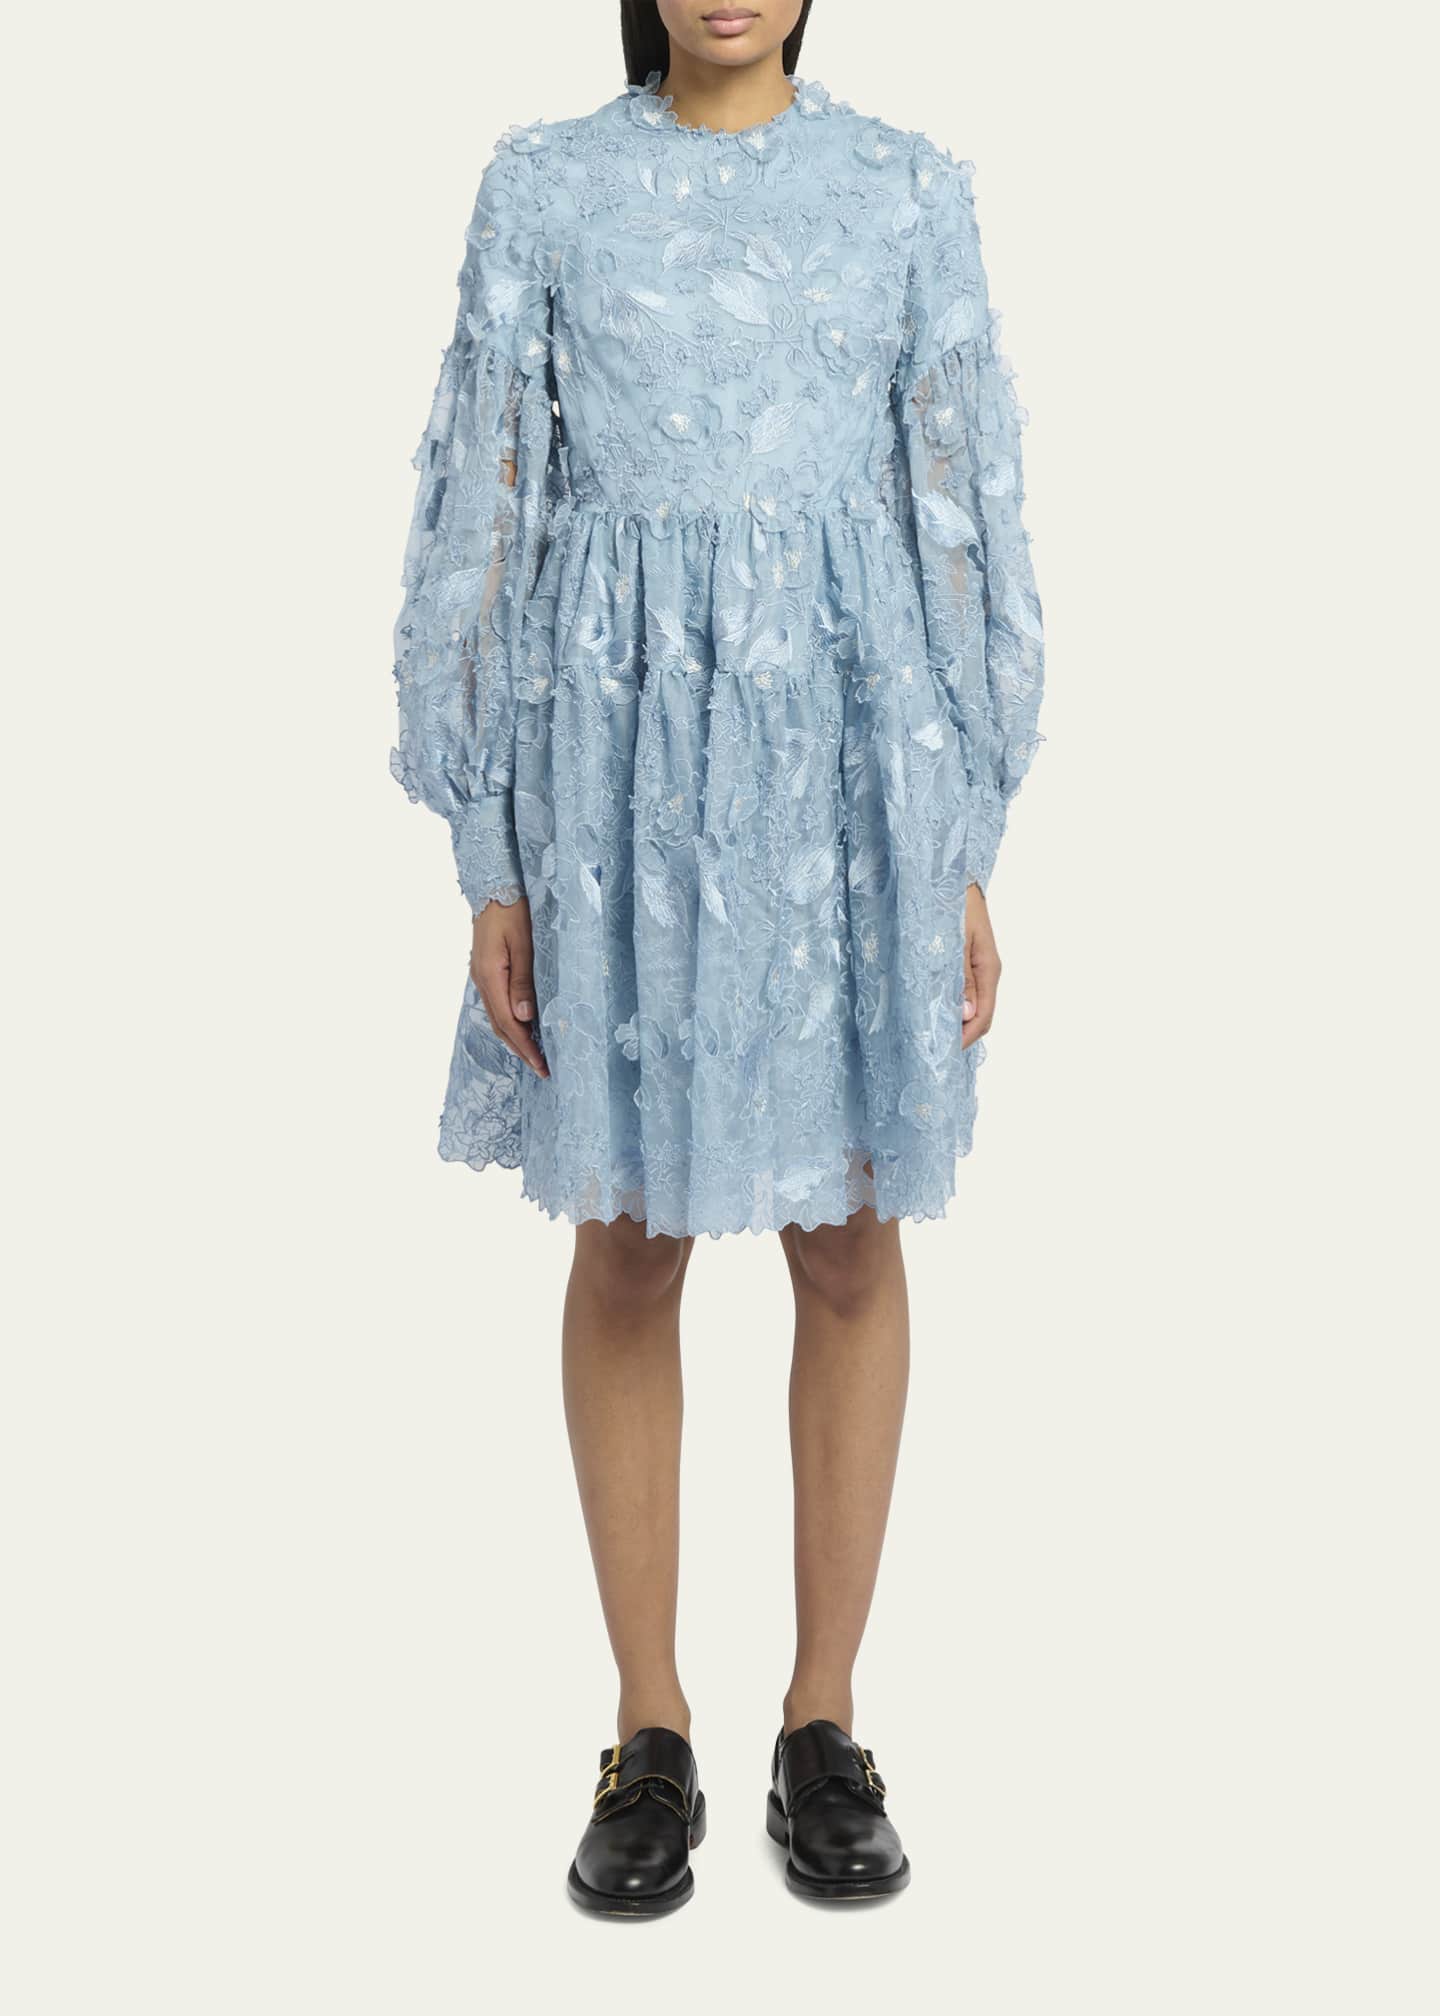 Erdem Floral Embroidered Applique Long-Sleeve Tiered Dress - Bergdorf ...